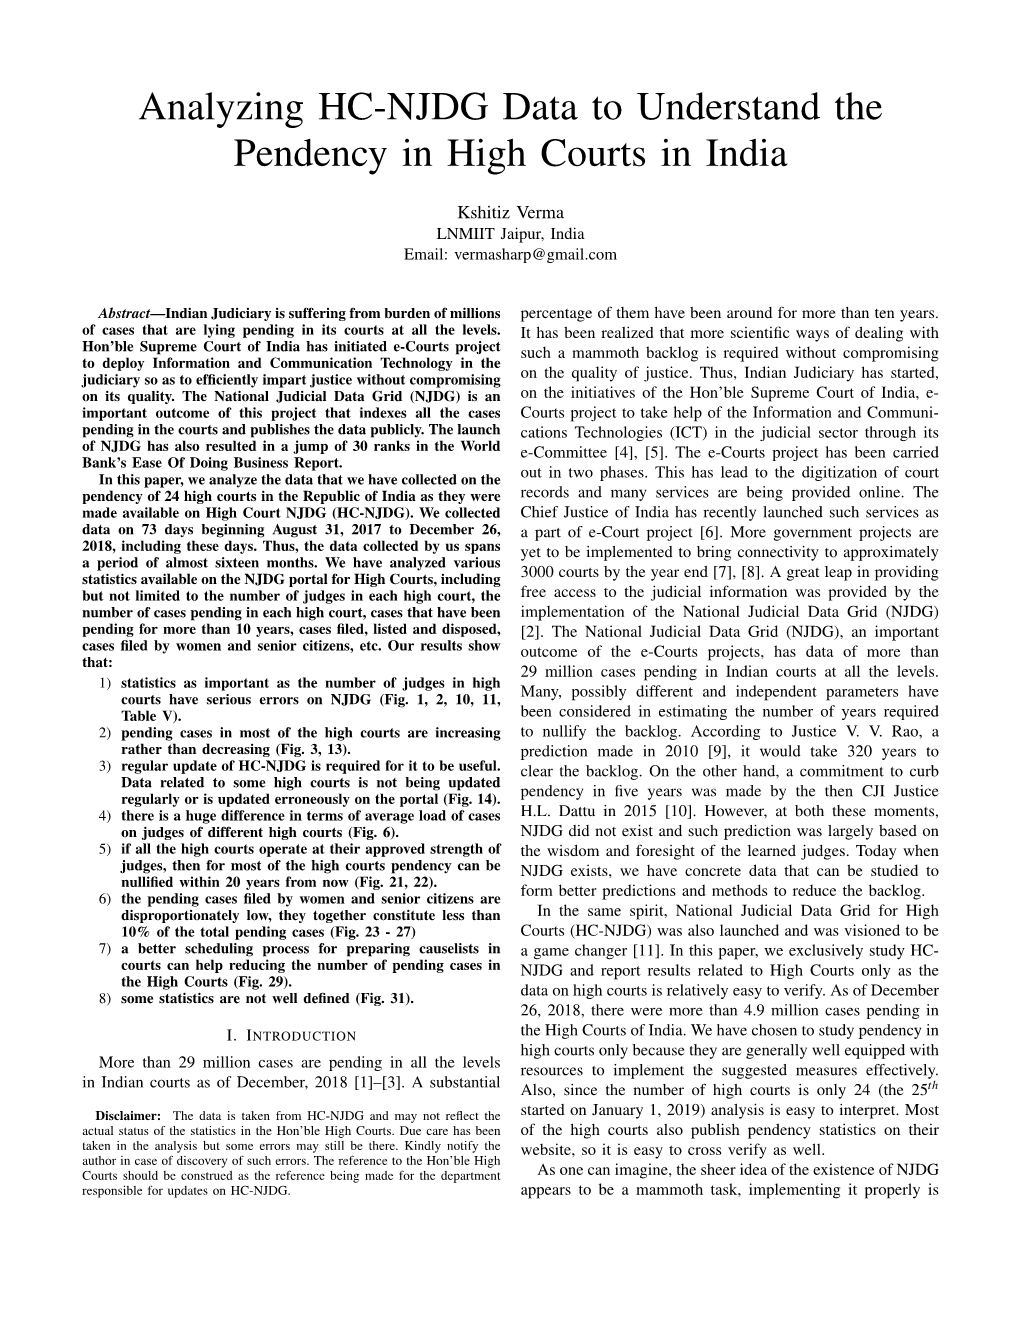 Analyzing HC-NJDG Data to Understand the Pendency in High Courts in India